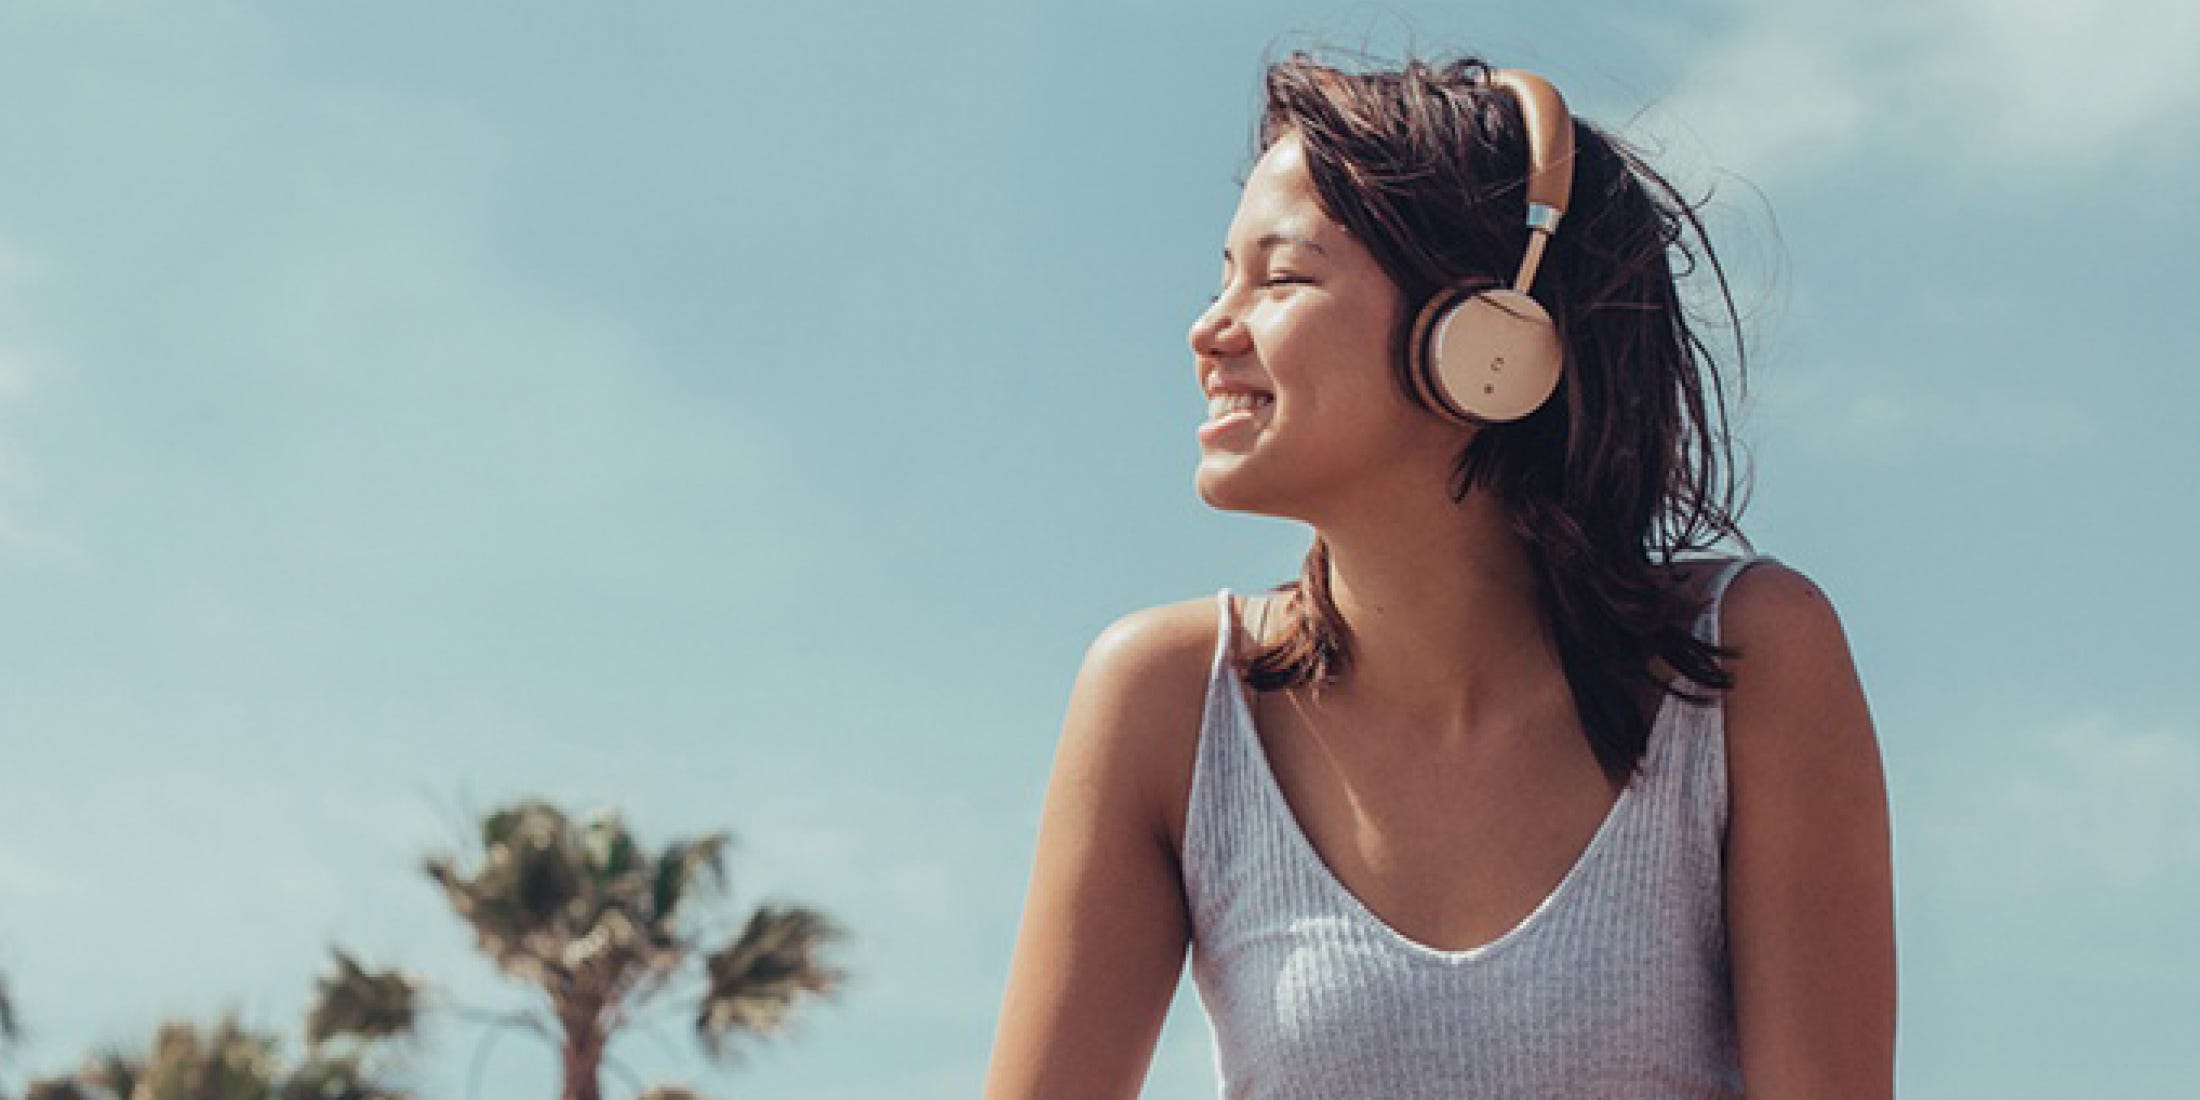 A woman wearing a tank top is with her eyes closed and is wearing headphones while smiling and facing the sunlight.